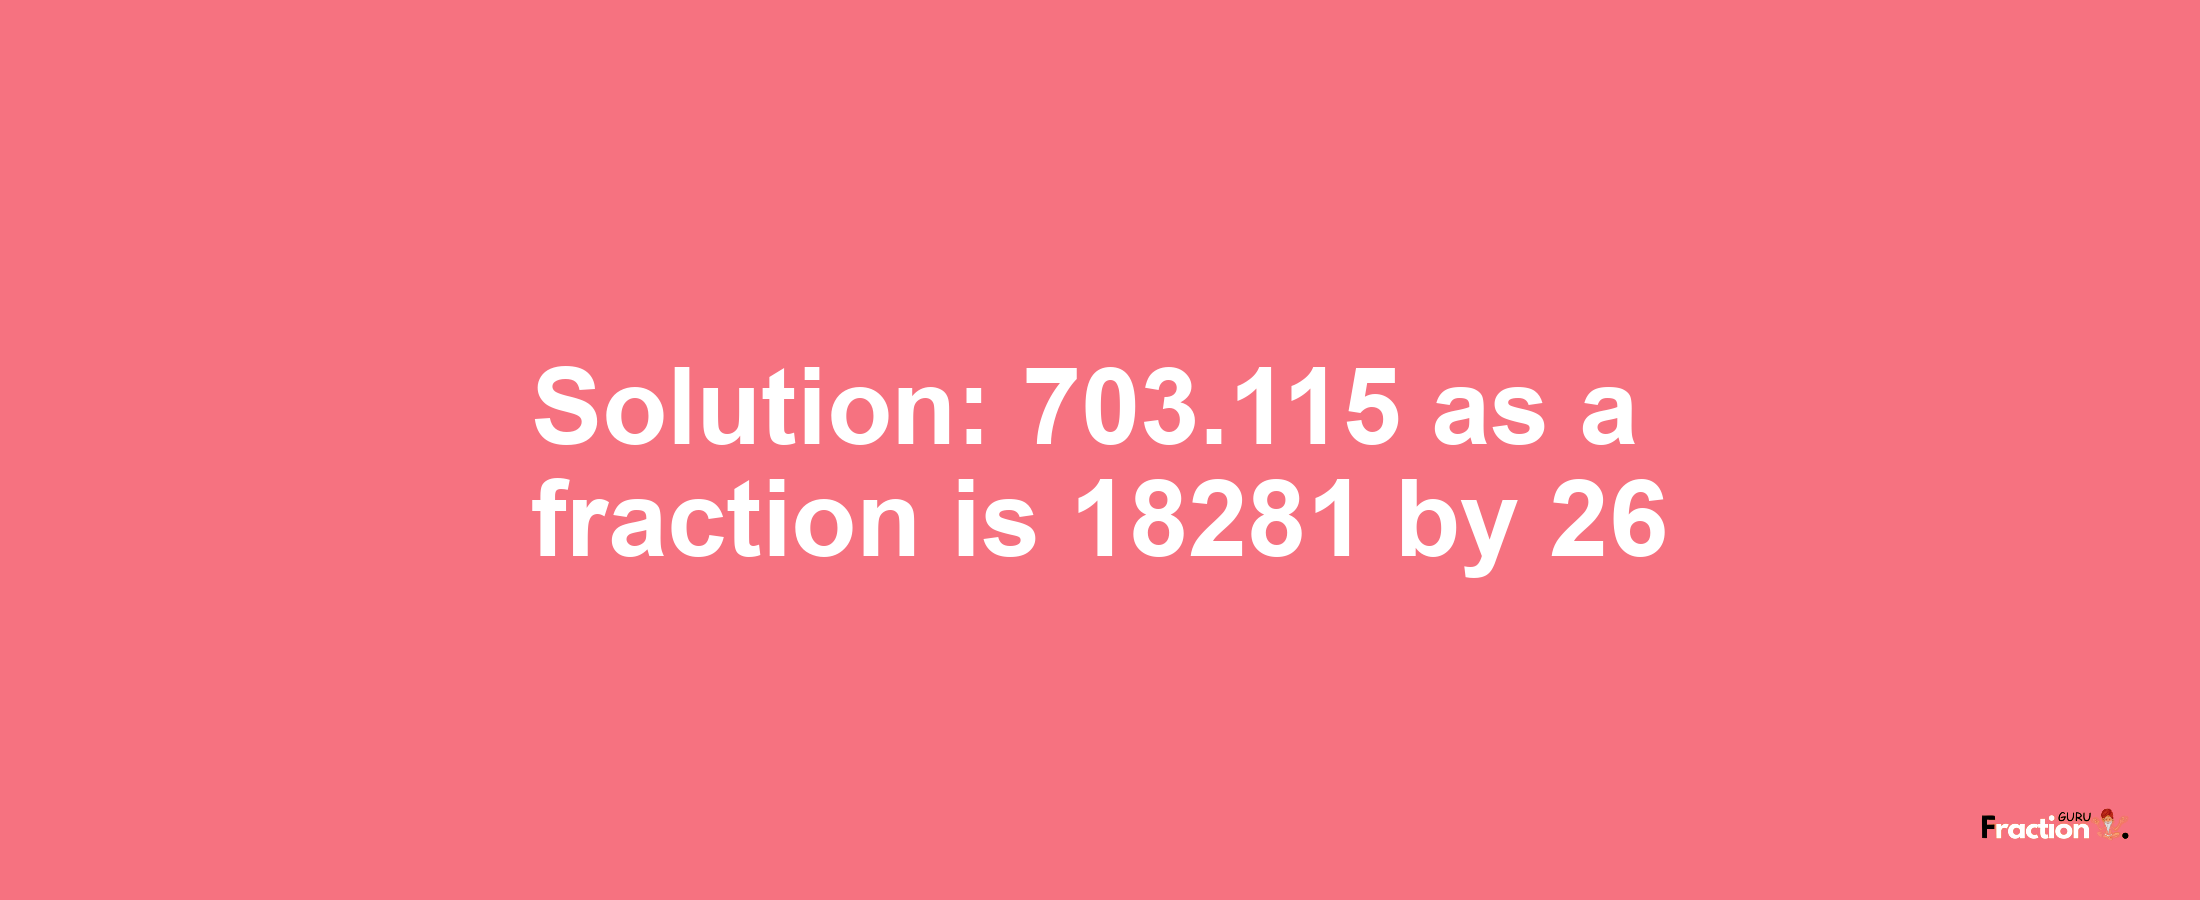 Solution:703.115 as a fraction is 18281/26